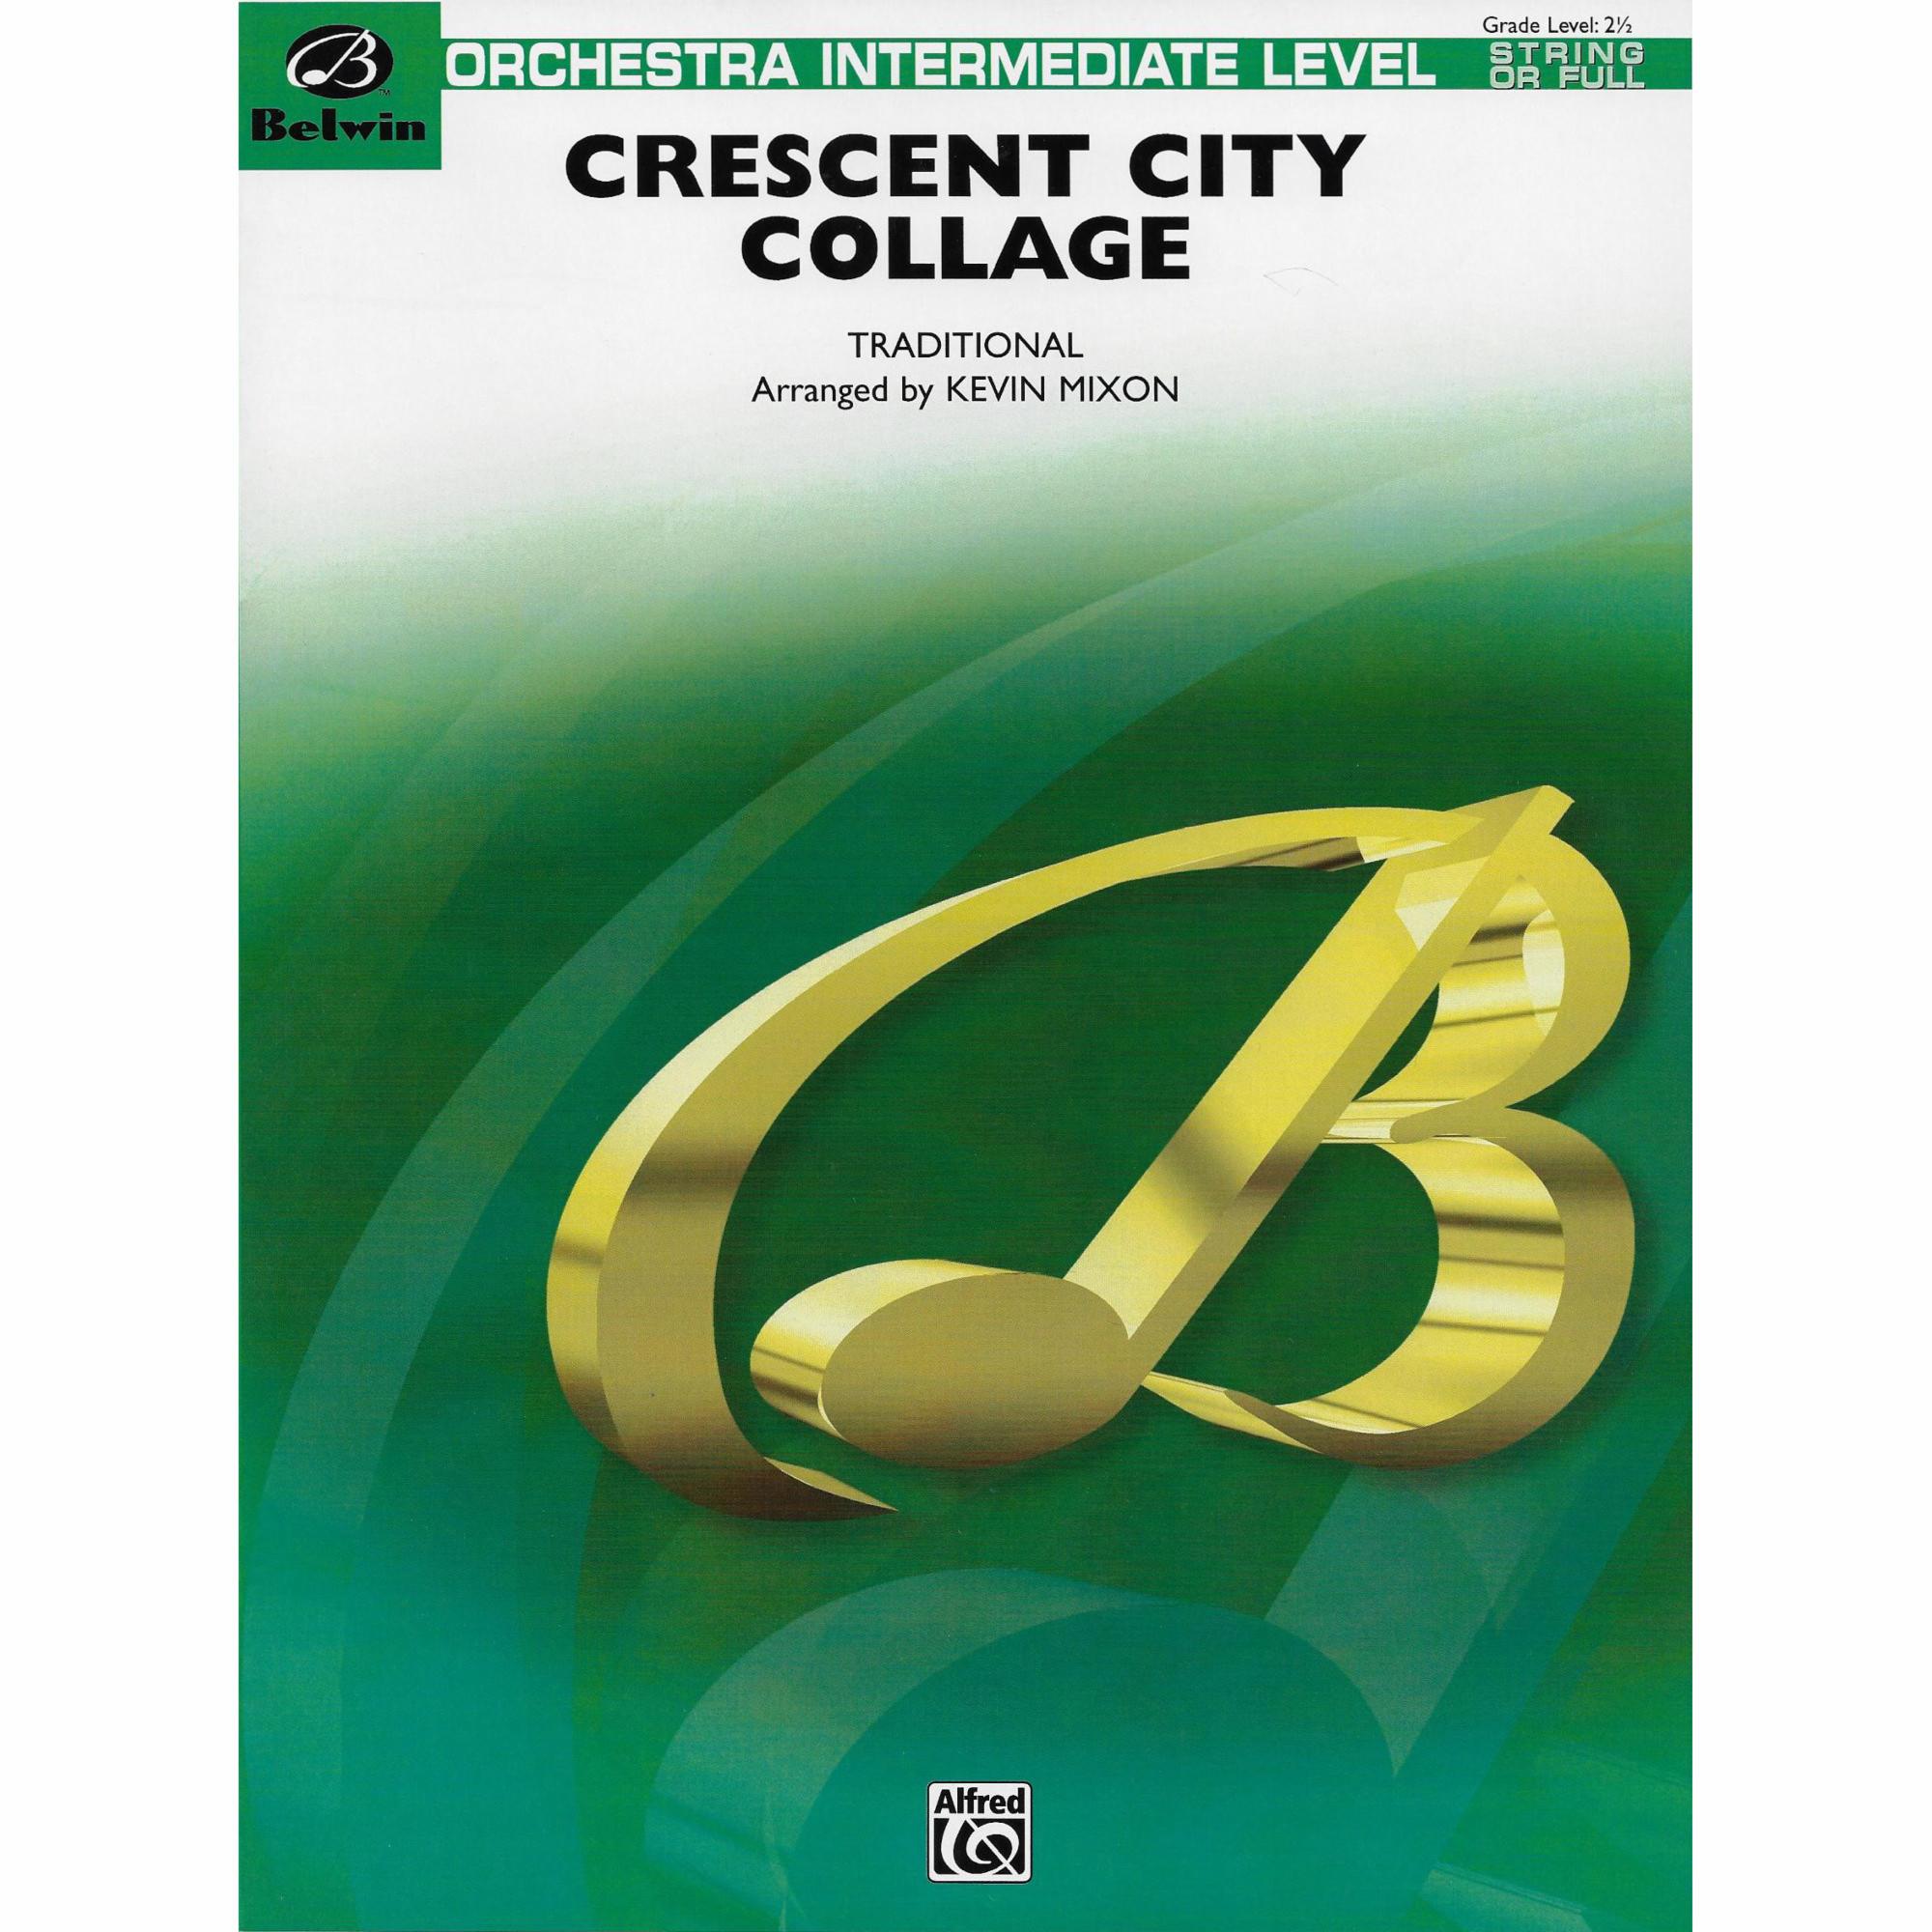 Cresent City Collage for String Orchestra